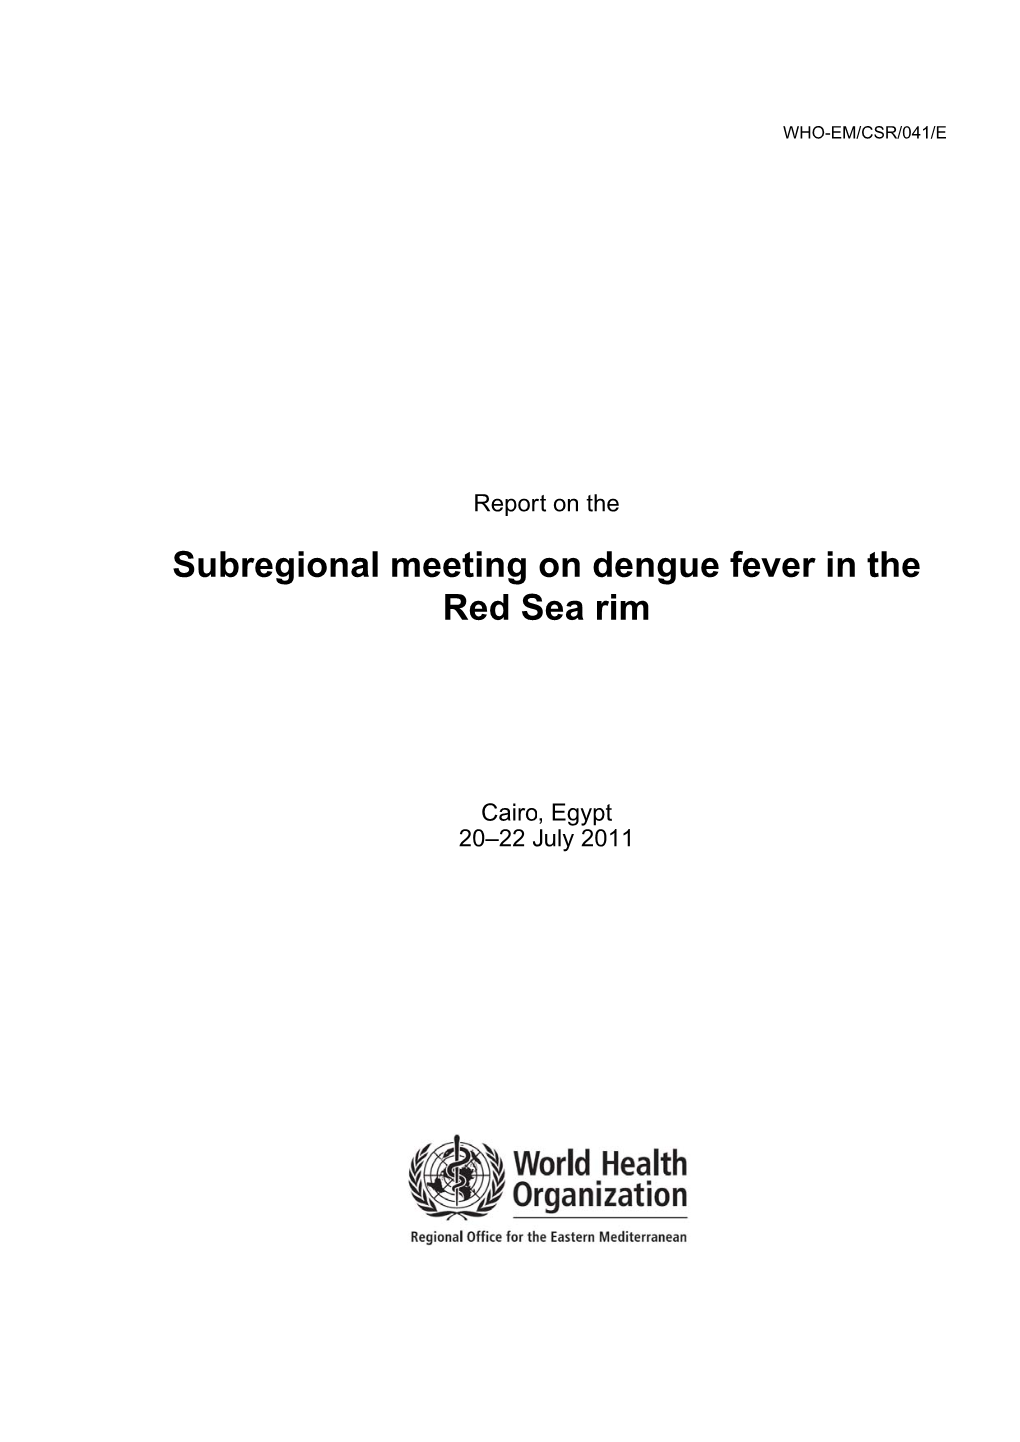 Subregional Meeting on Dengue Fever in the Red Sea Rim